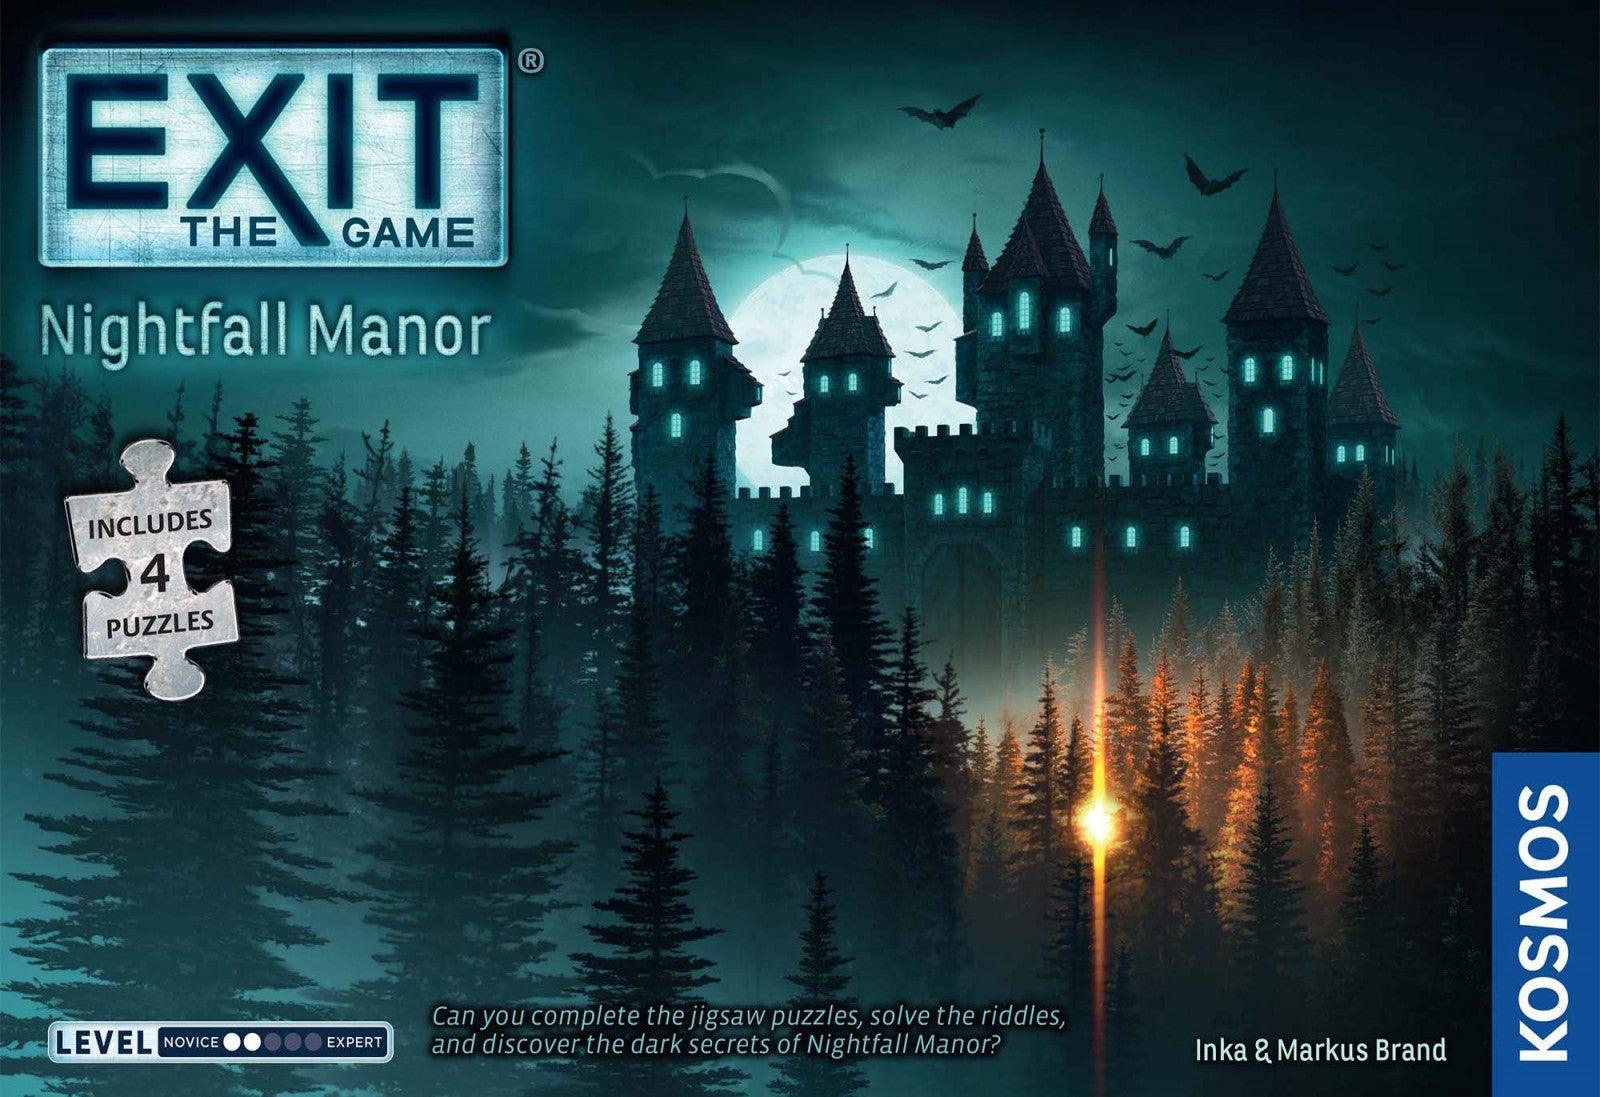 VR-96911 Exit the Game Nightfall Manor PUZZLE (Jigsaw Puzzle and Game) - Kosmos - Titan Pop Culture